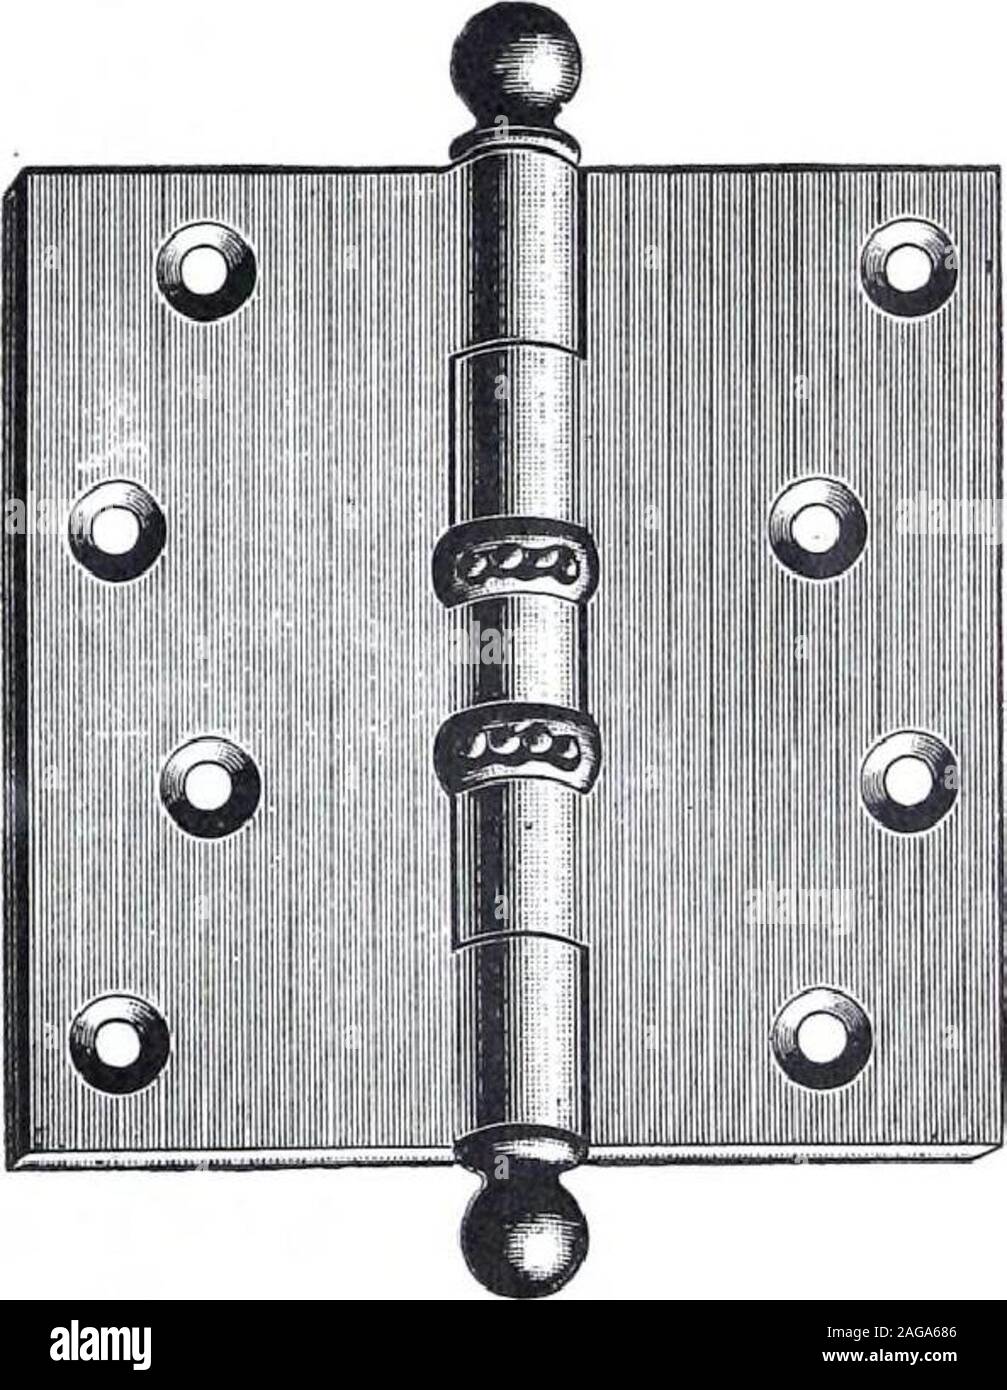 . Illustrated Catalogue of Locks and Builders Hardware. Enlarged View of Ball o Bearings used in Butts. % fill ^ ?mt EH8071. EH8072 Loose Pin, Fibre Washer No.No.No.No.No.No.No. EH8071EH8071EH8071EH8071EH8071EH7071EH707I 4 ?5 678 x4x4&gt;^X 5x5y2X 6X 7X 8 in. 51 oz. per Pair. in. 70 oz. per Pair.n. 83 oz. per Pair,n. 110 oz. per Pairn. 134 oz. per Pair, in. 158 oz. per Pair. in. 236 oz. per Pair. ^ Loose Pin, Ball Bearing No. EH8072—4 x 4 in. 51 oz. per Pair.No. EH8072—4K x 4^ in. 70 oz. per Pair.No. EH8072—5 x 5 in. 83 oz. per Pair. No. EH8072—5K x 5}4 in. 110 oz. Per pair.No. EH8072—6 x 6 in Stock Photo